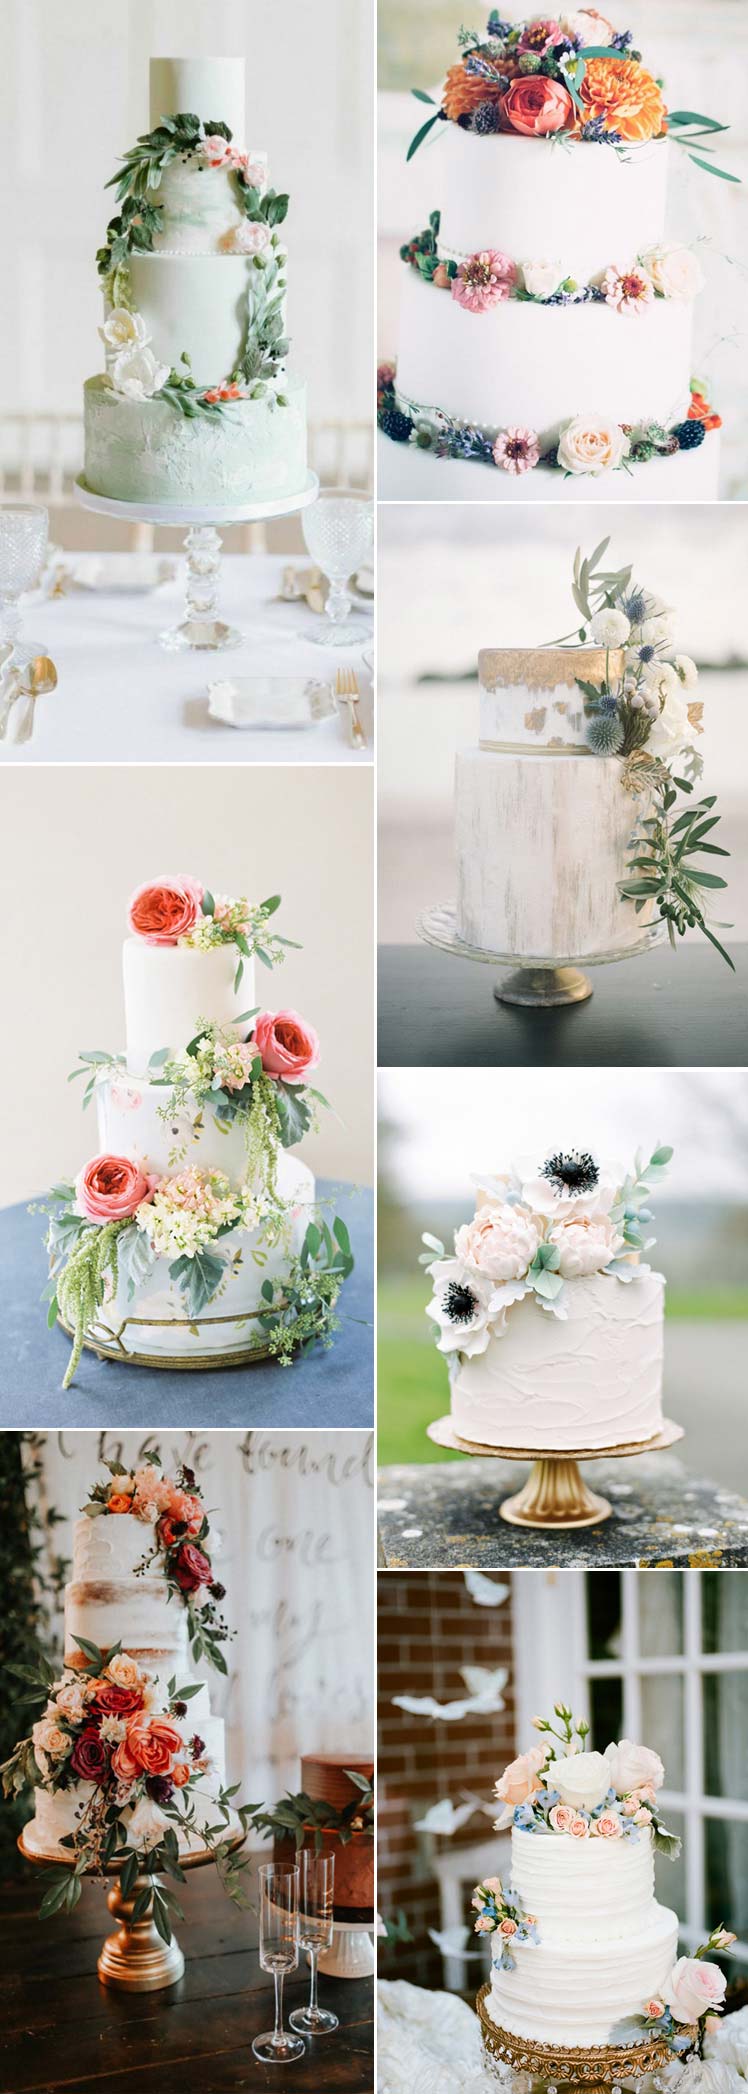 Wedding cakes with real flowers